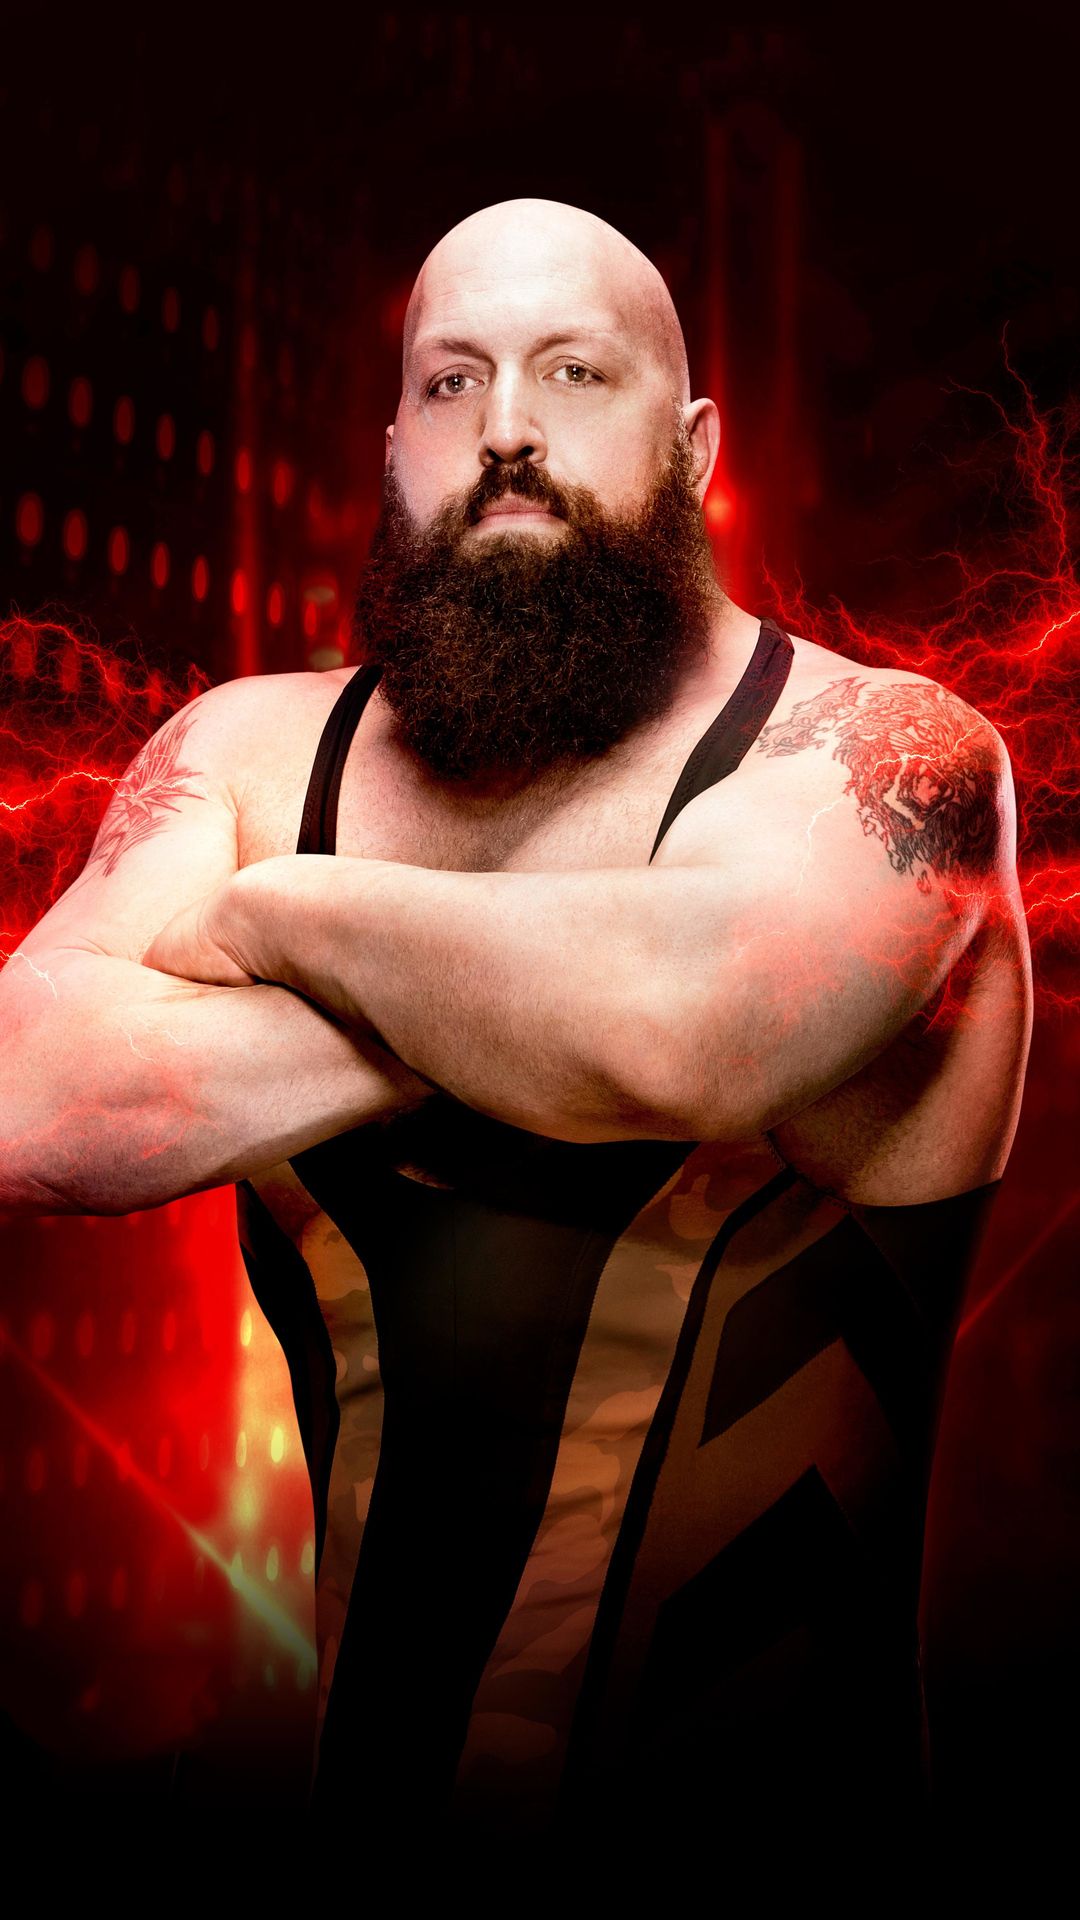 Big Show WWE 2K19 iPhone 6s, 6 Plus, Pixel xl , One Plus 3t, 5 HD 4k Wallpaper, Image, Background, Photo and Picture